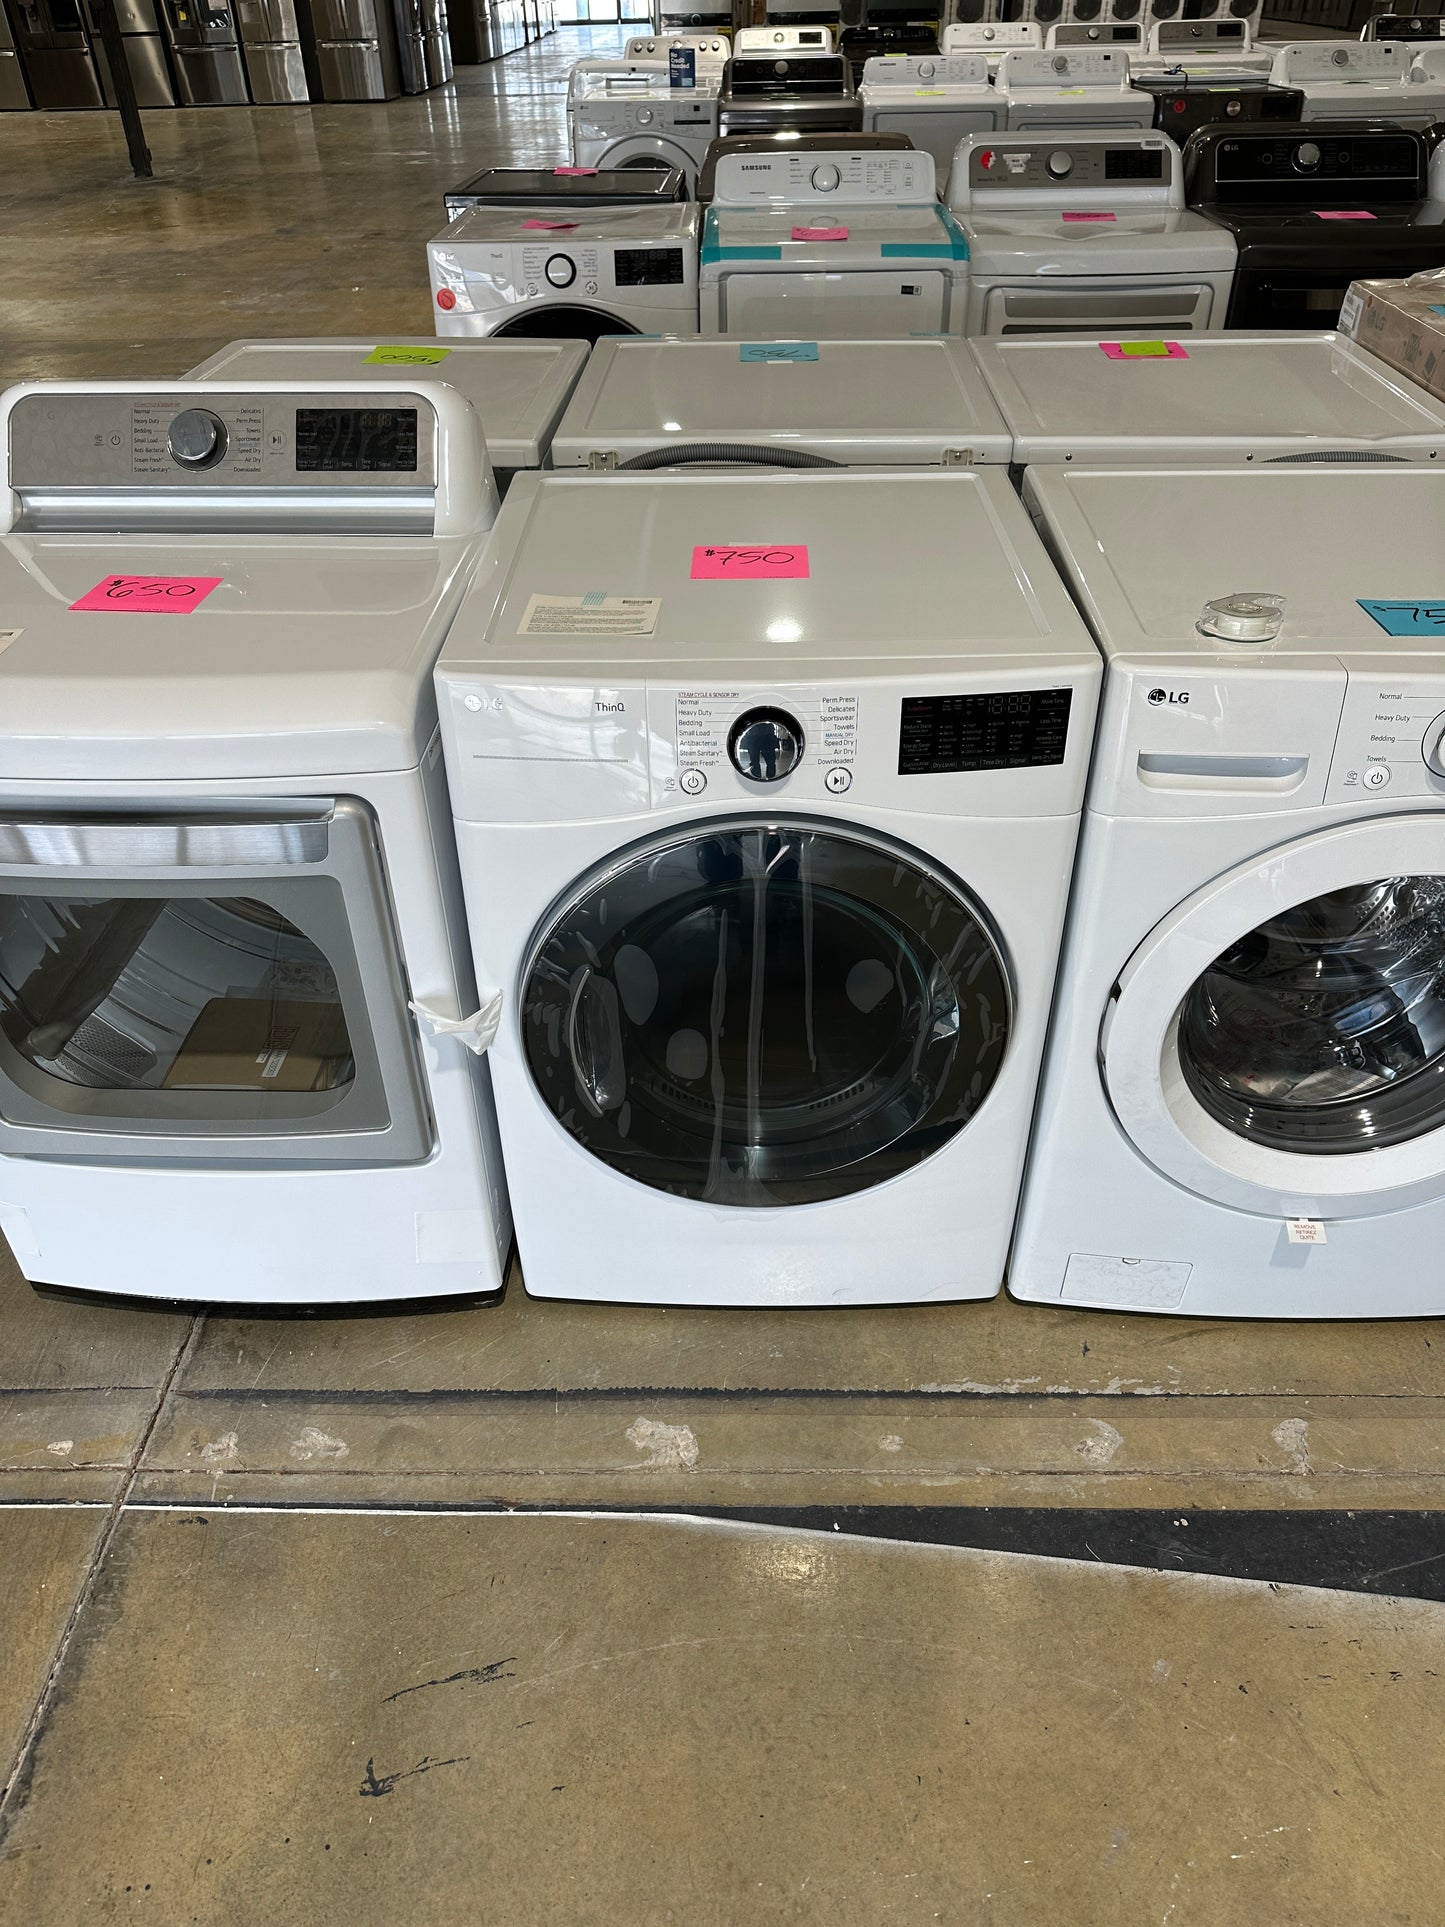 Model: DLEX3900W LG STACKABLE DRYER - DRY11687S